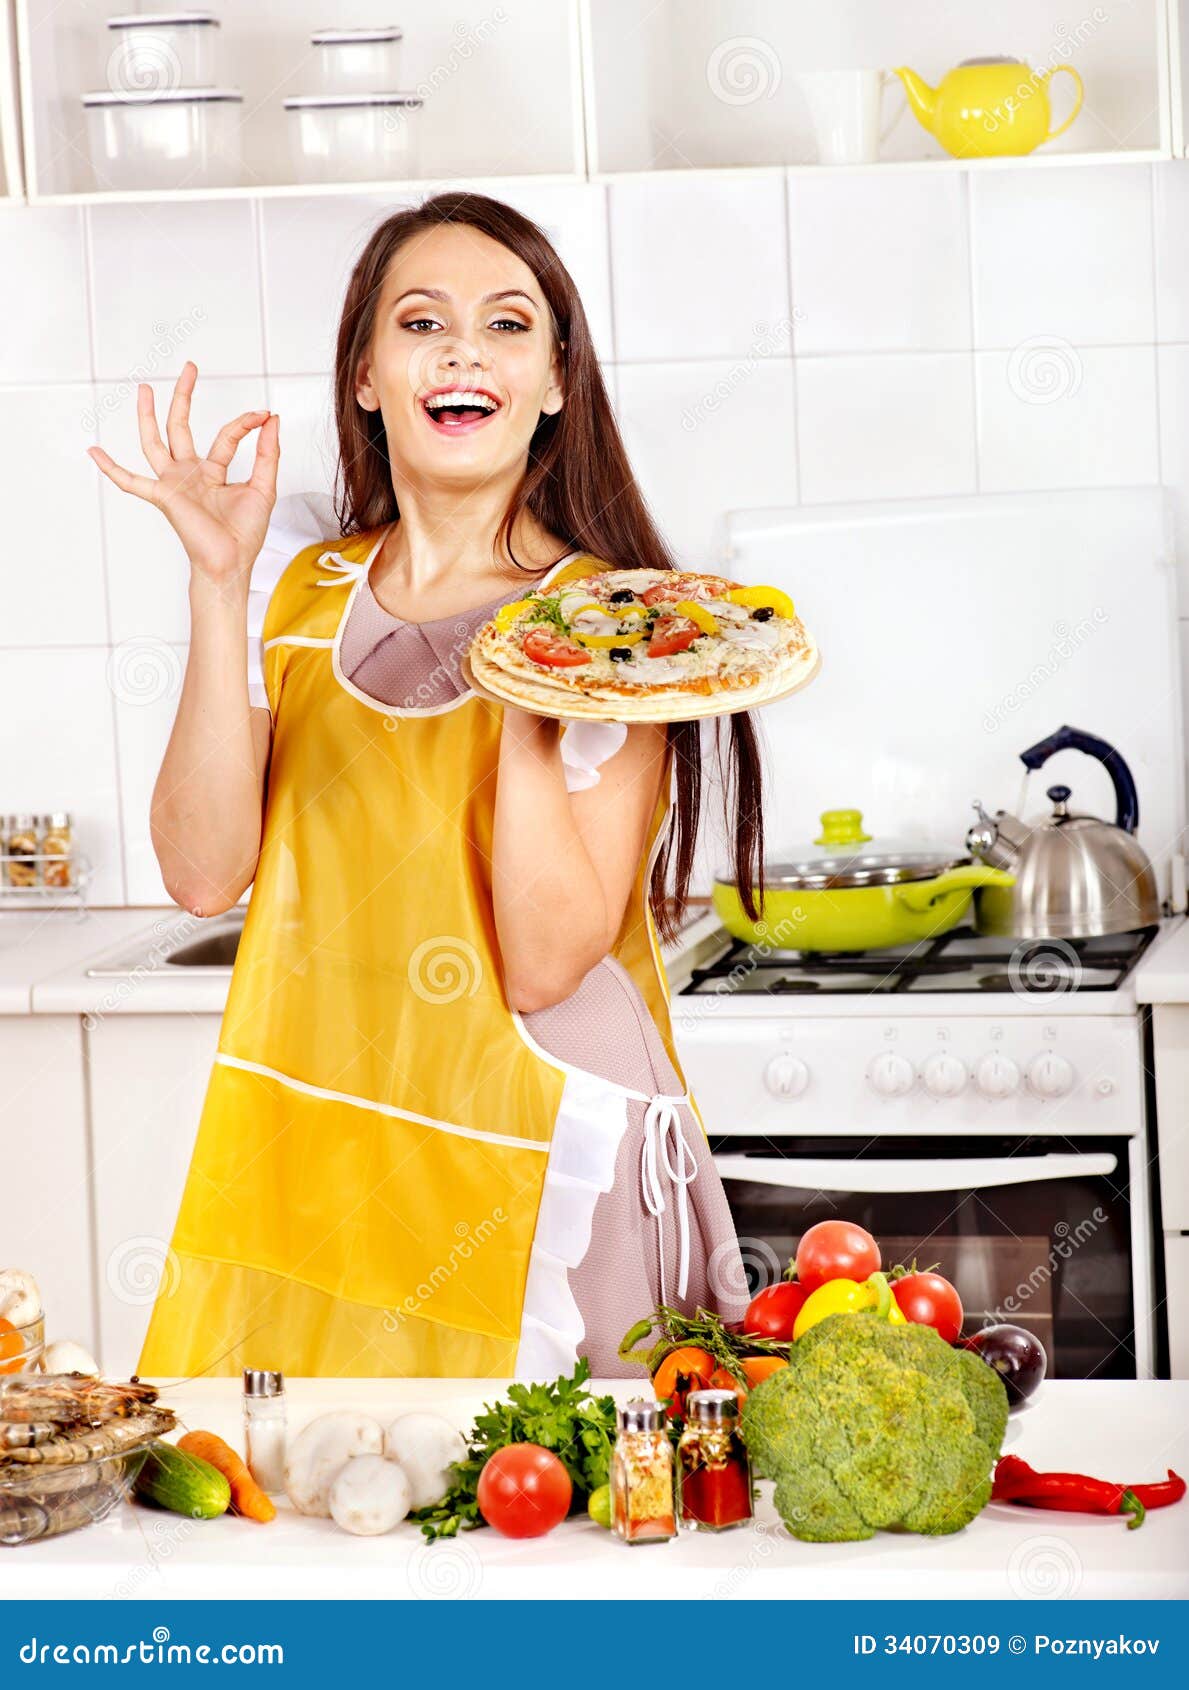 woman-cooking-pizza-kitchen-34070309.jpg